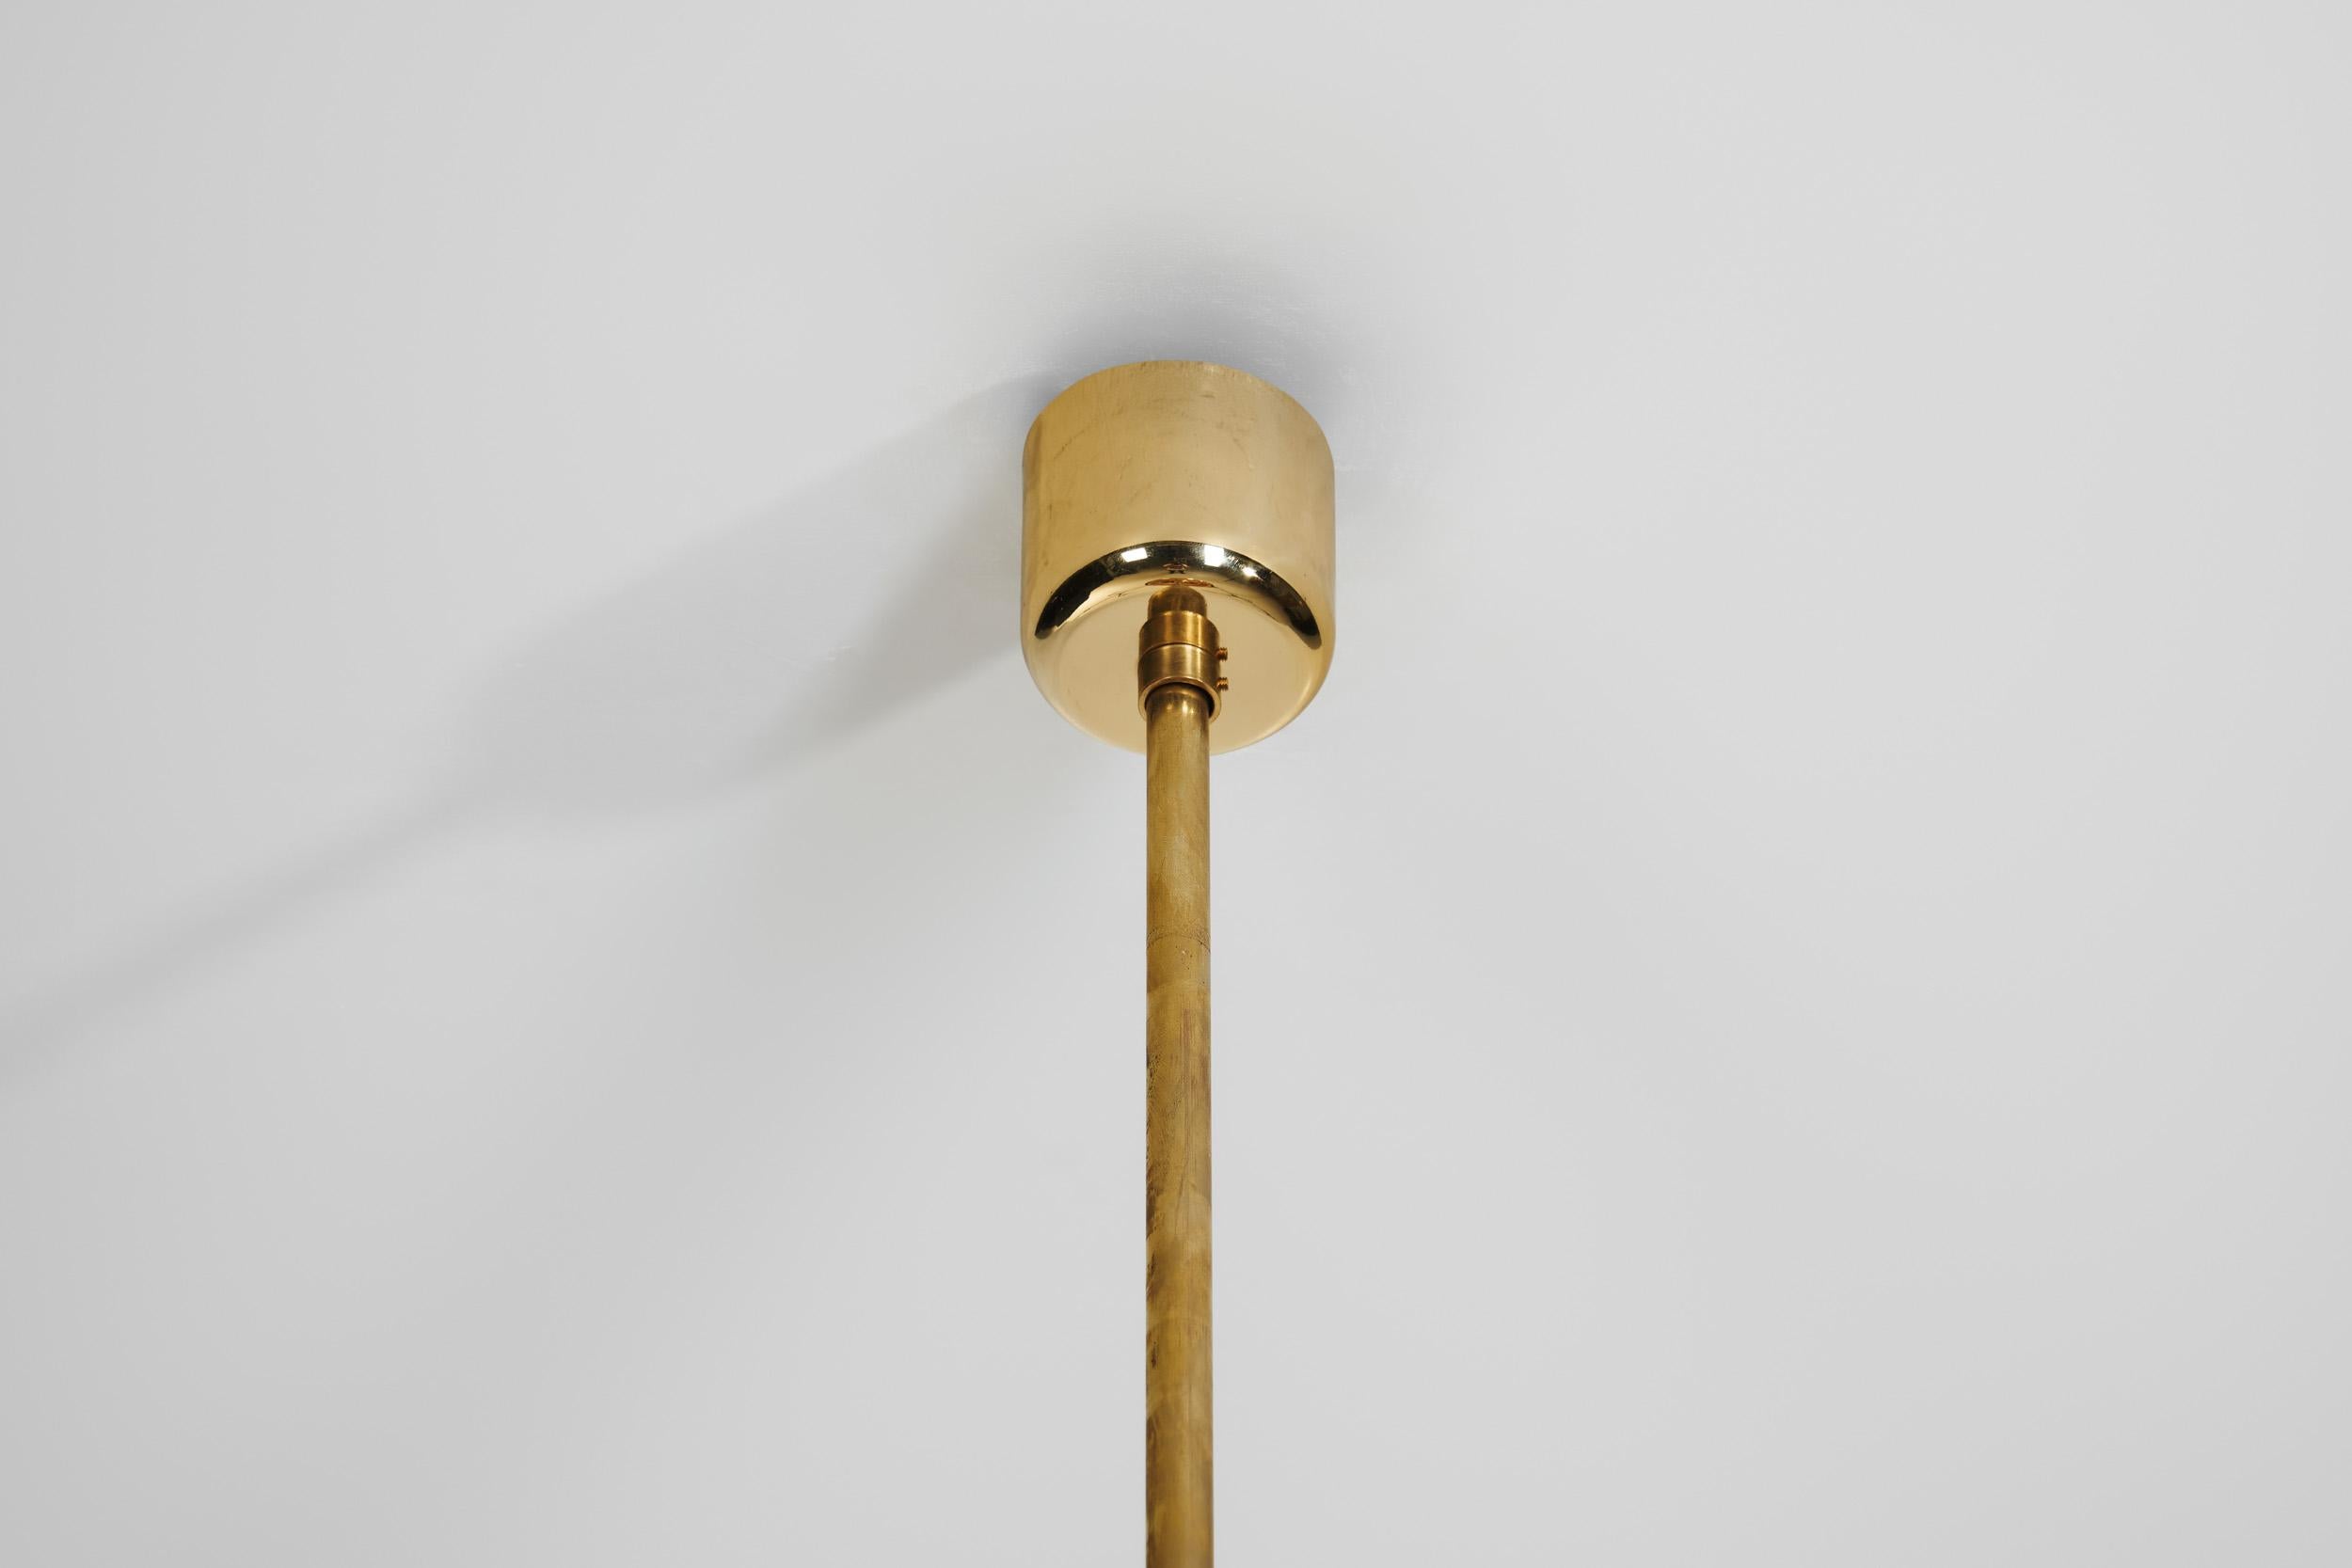 Late 20th Century Valto Kokko Gold-Plated Pendant Lamp for I-Valo, Finland 1970s